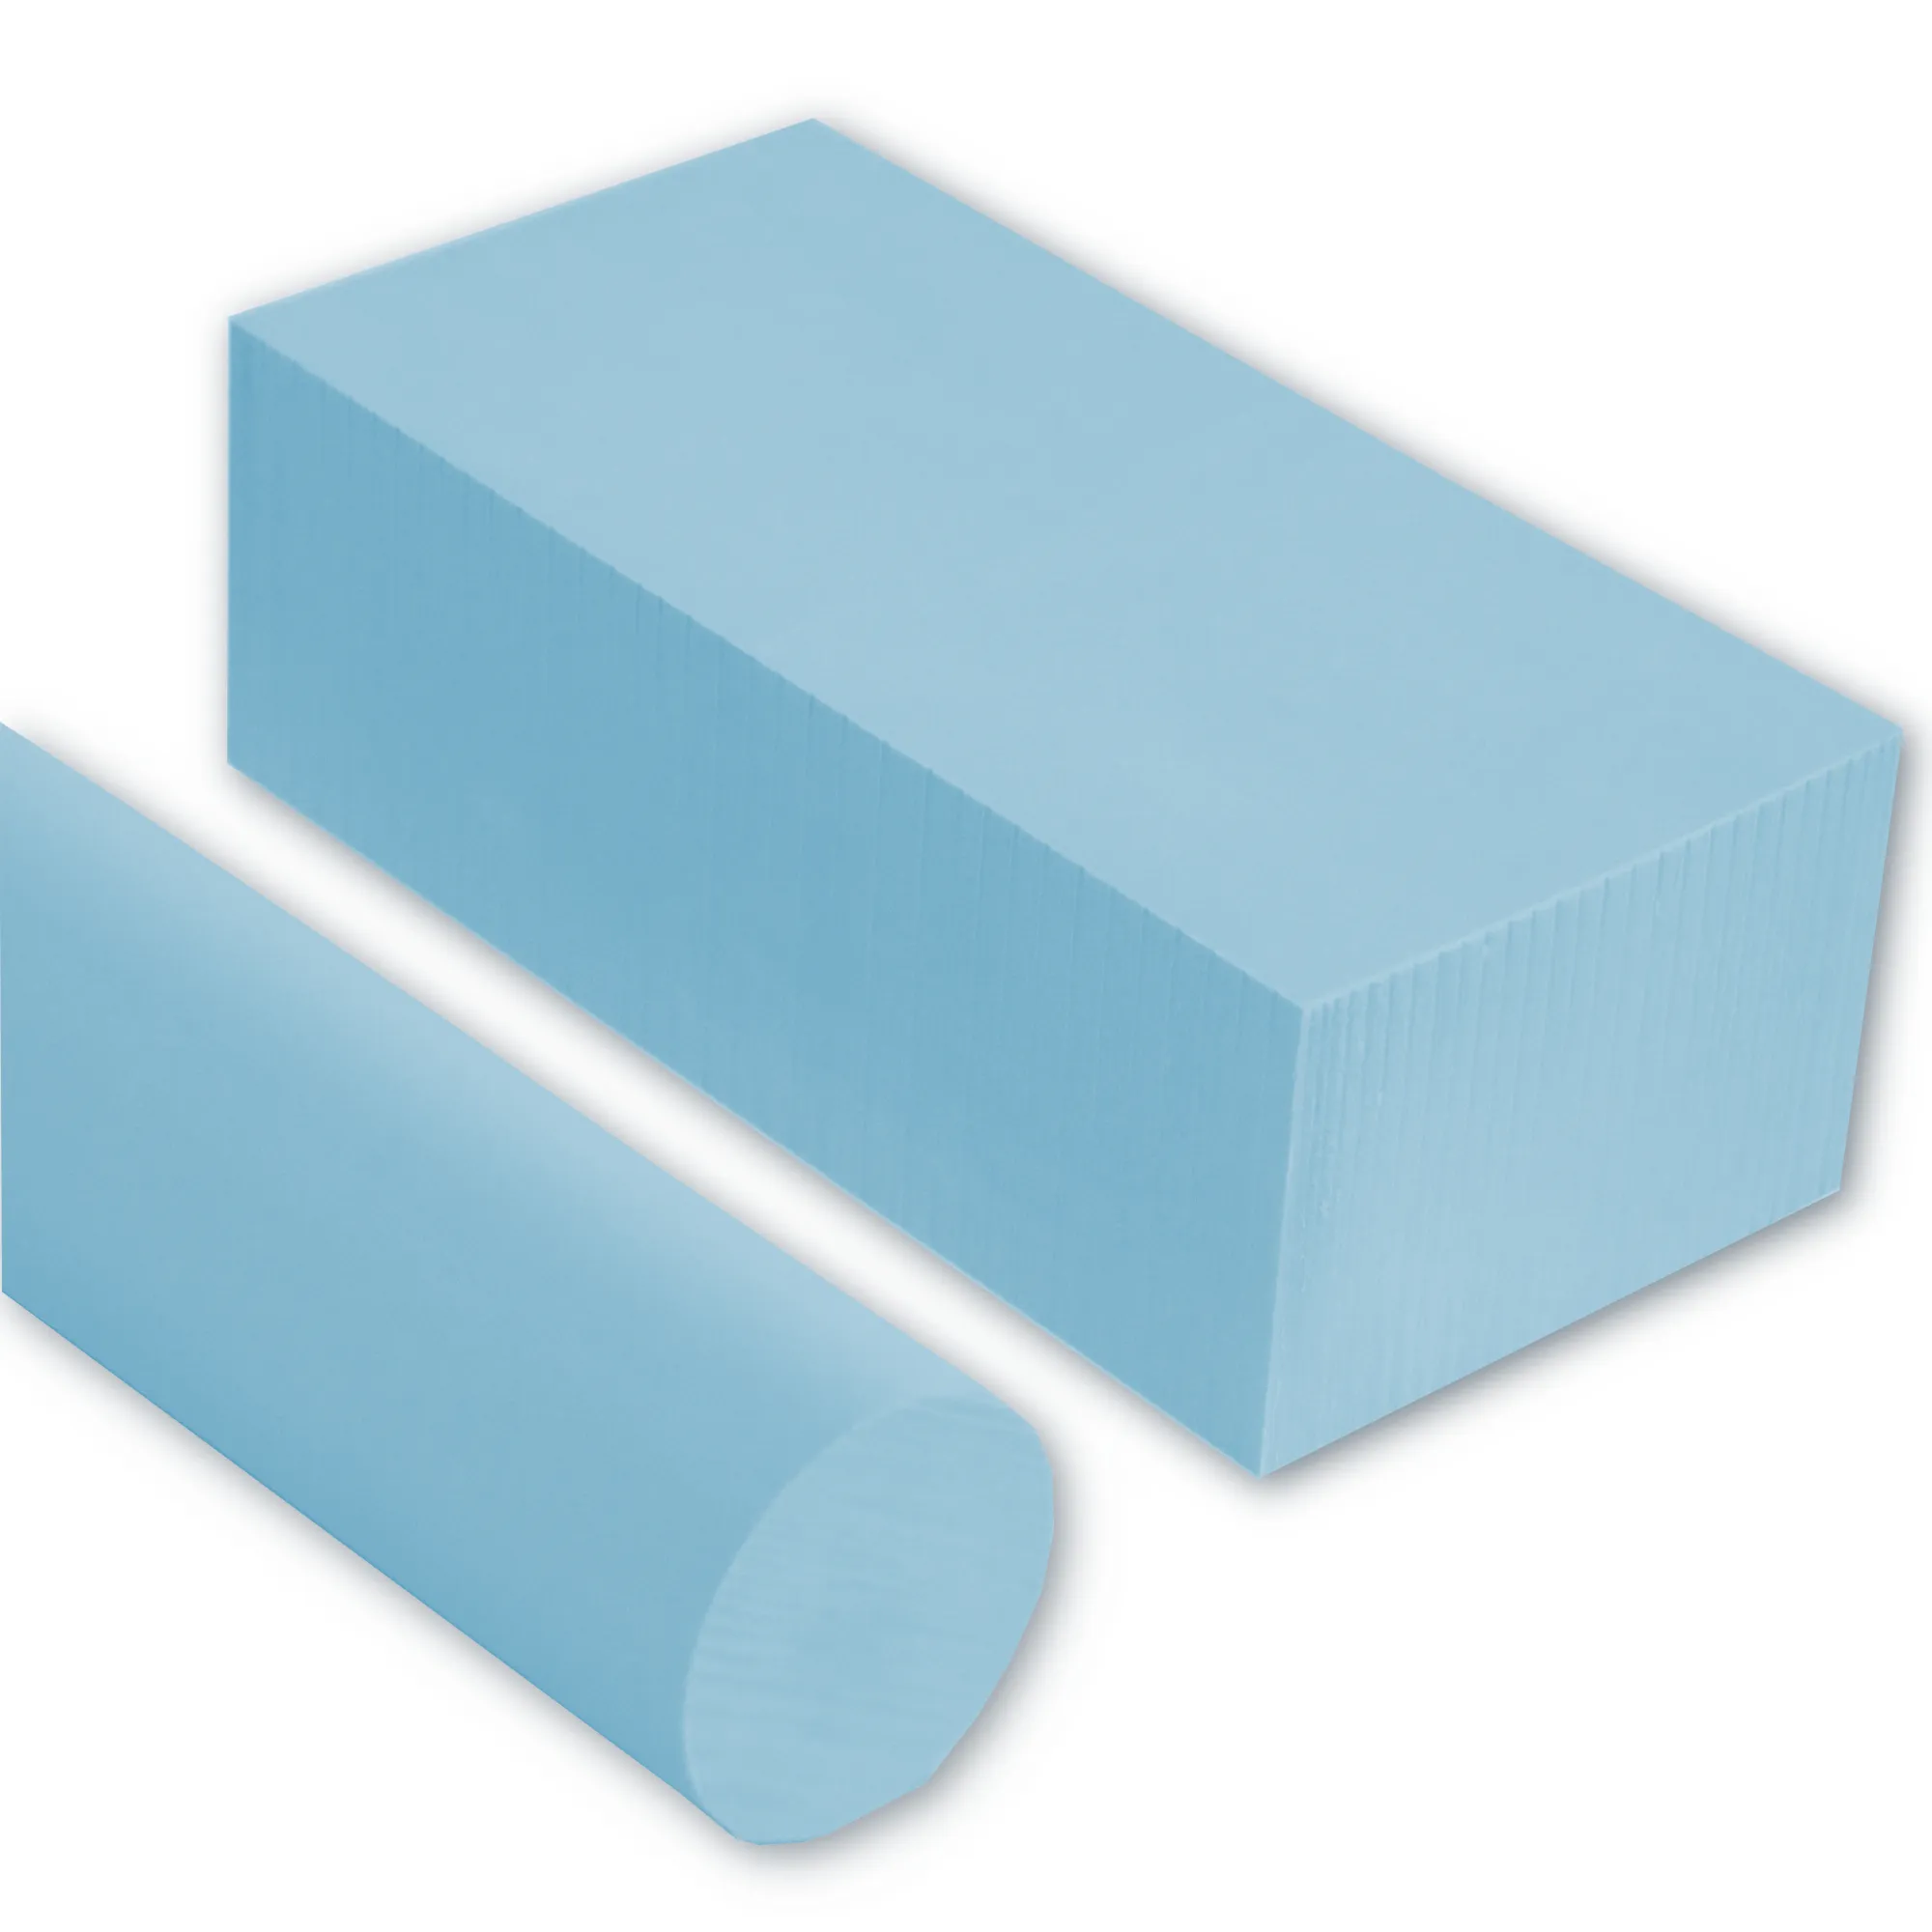 OPTIFORM B2X Sheets - Plug Assist Material For Thermoforming